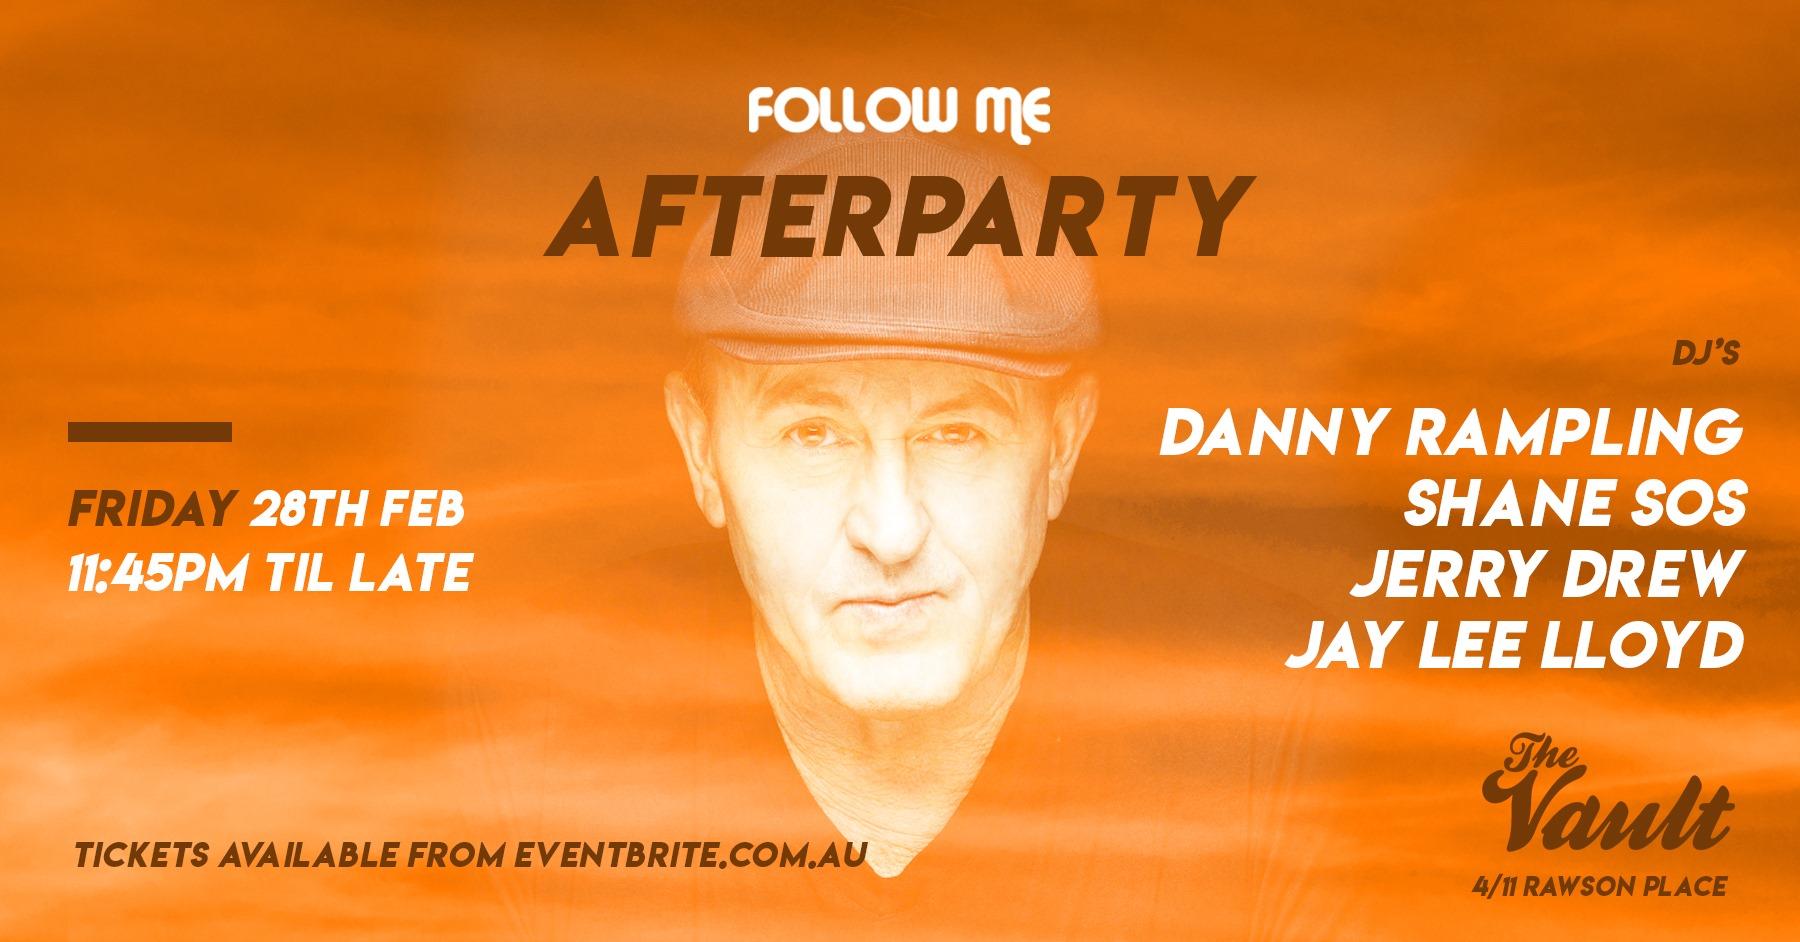 Follow Me Afterparty Featuring Danny Rampling